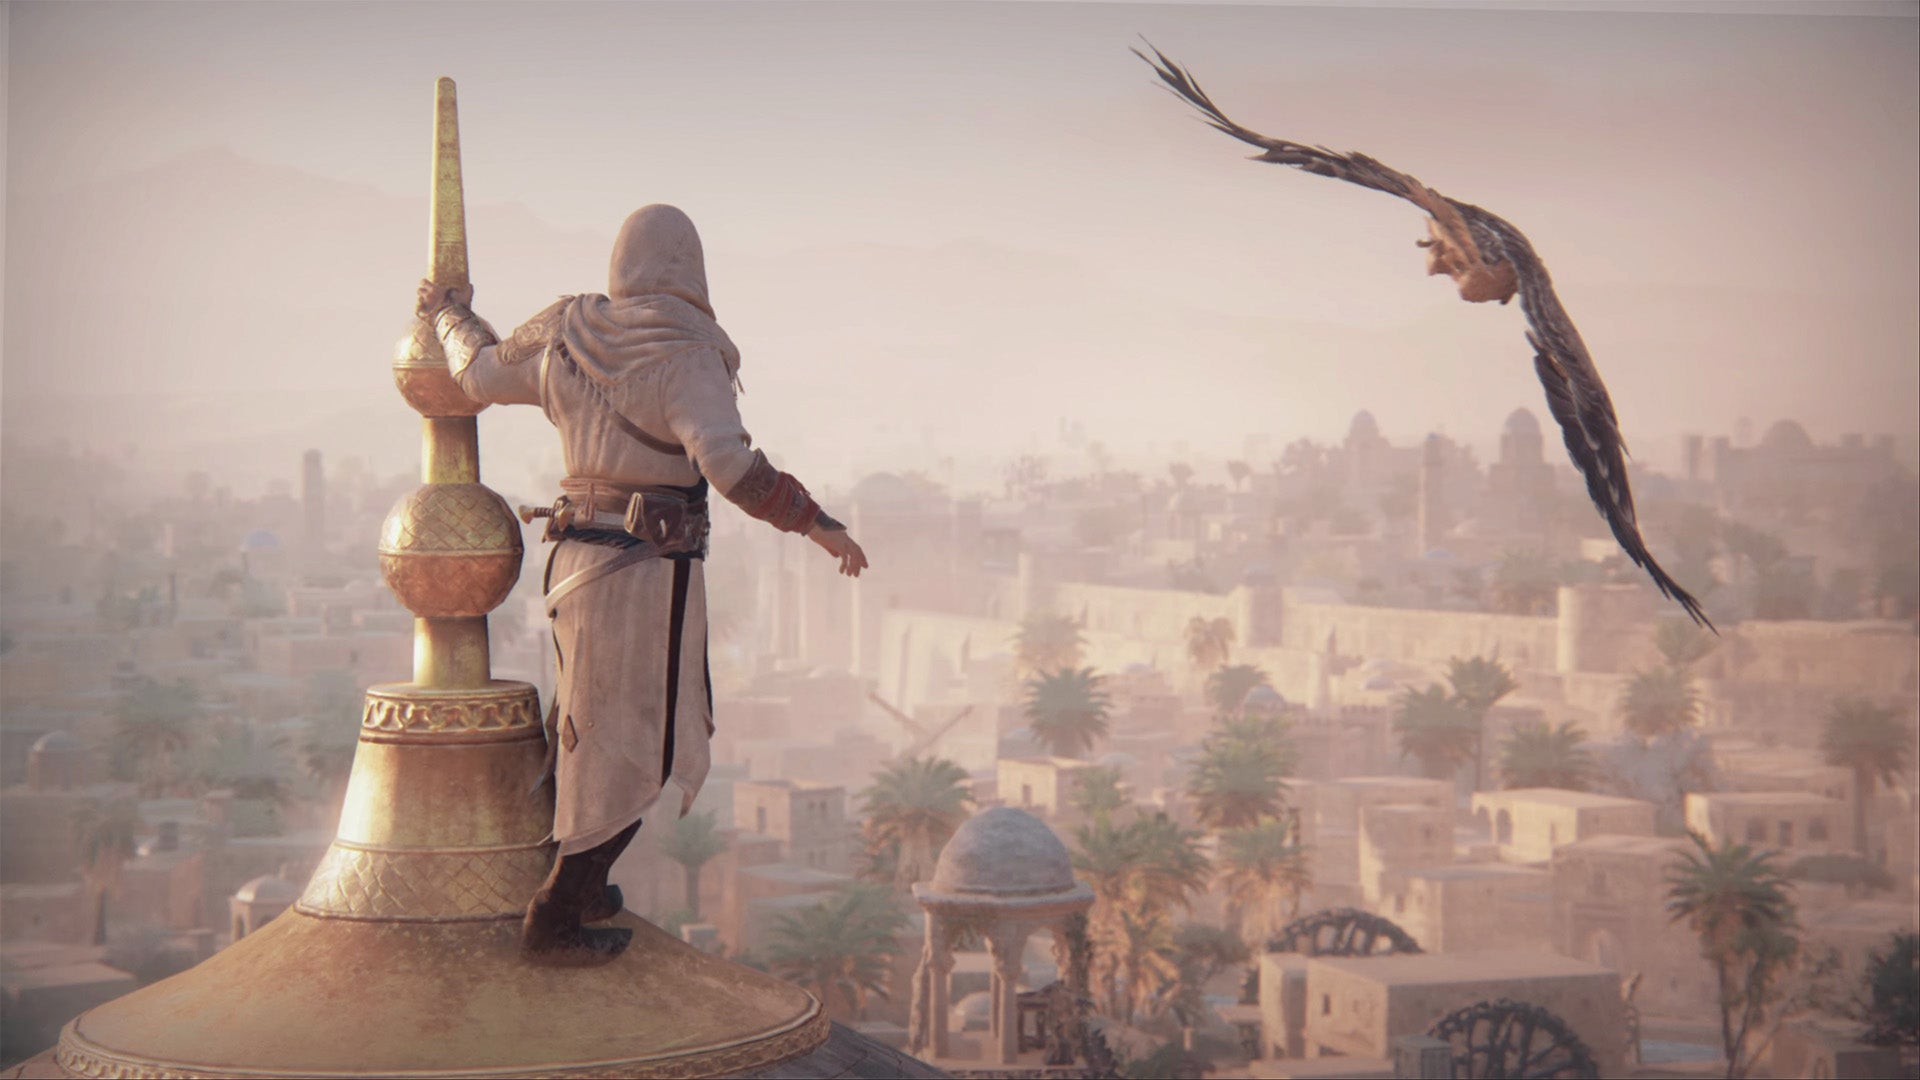 You are currently viewing Assassin’s Creed In-Game Advertisements Spark Frustration and Raise Boundaries Debate